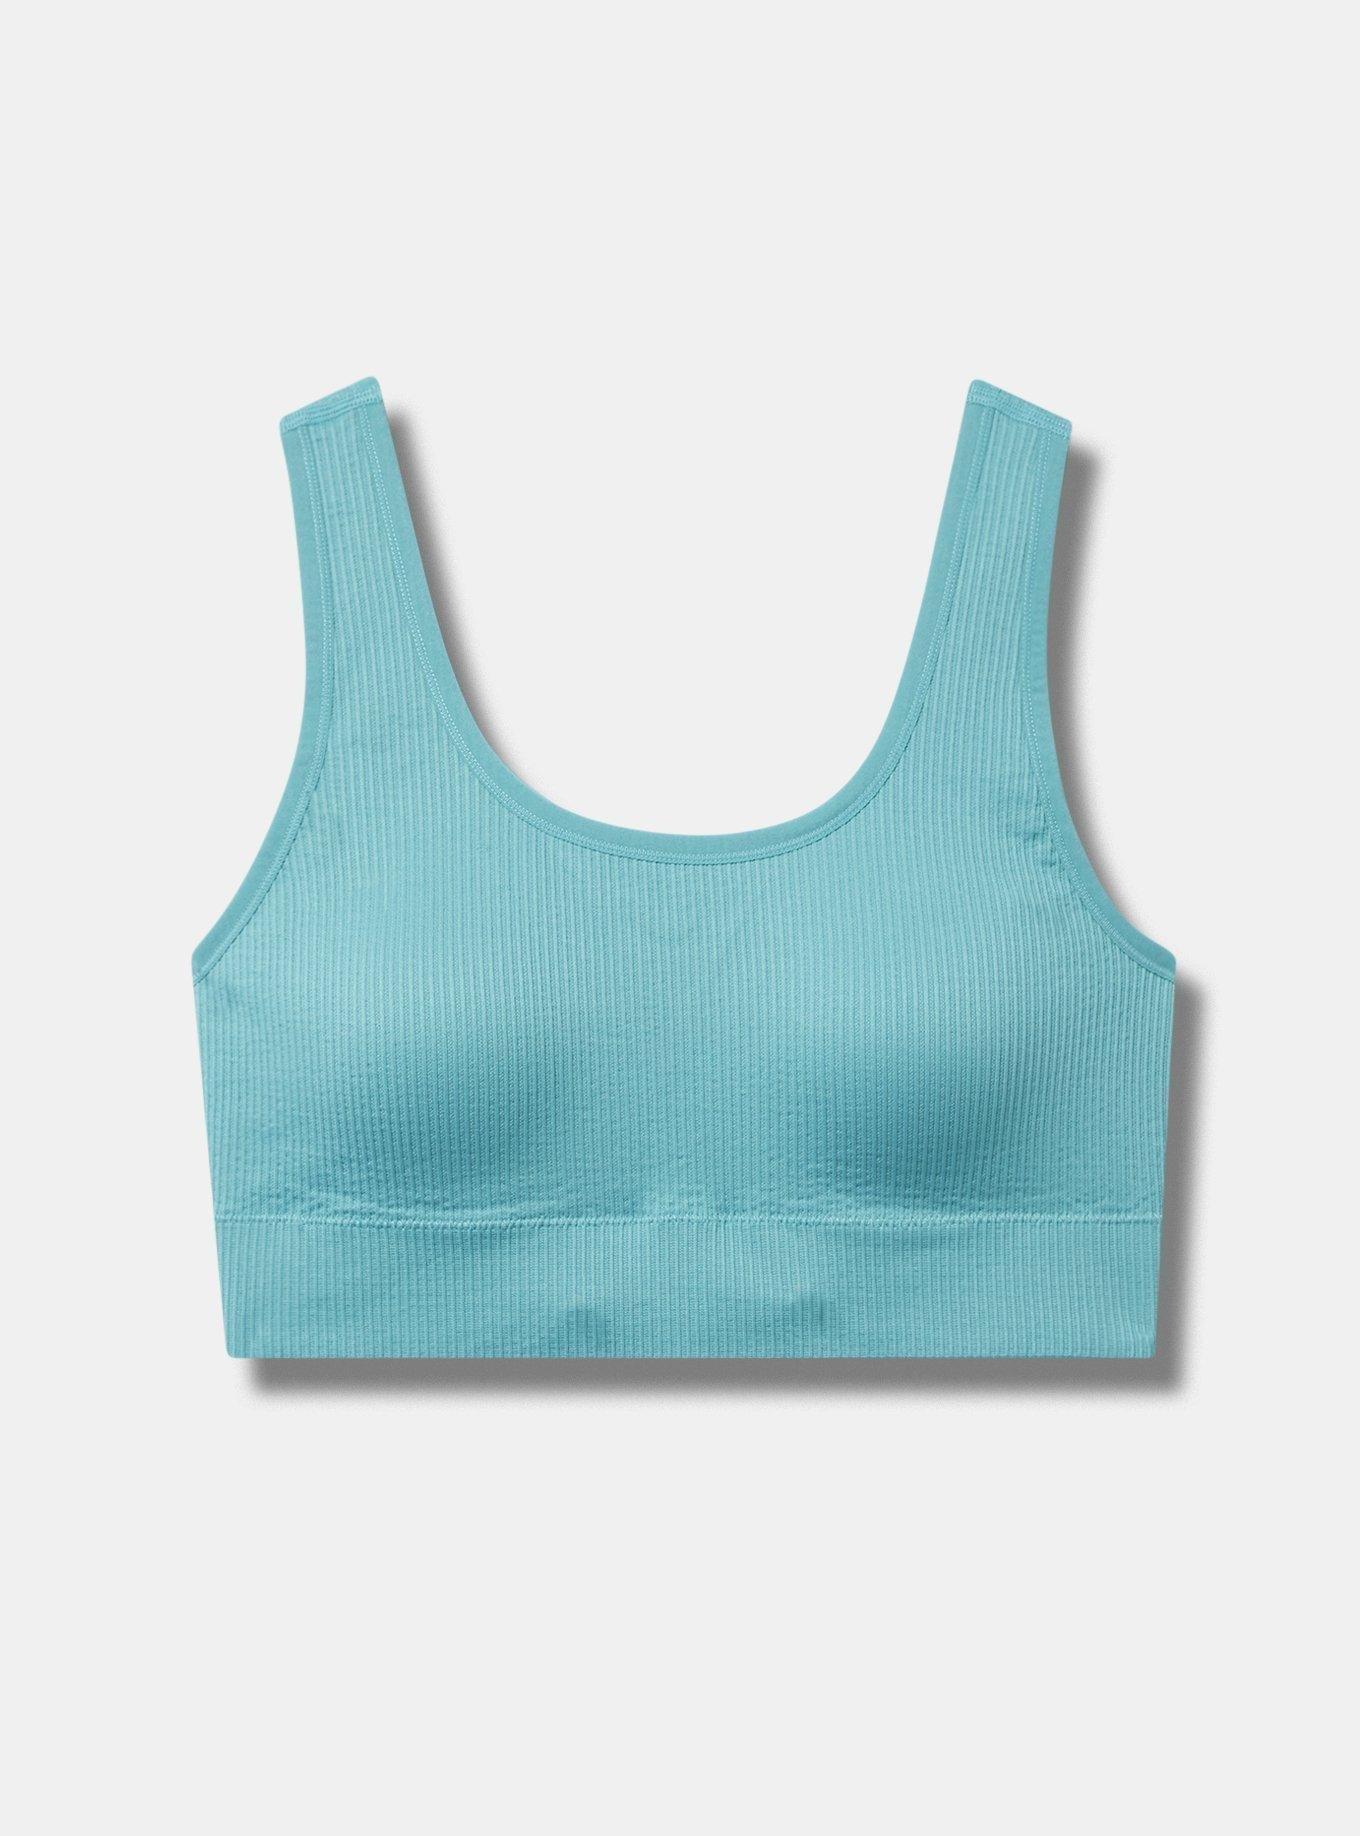 I'm a 44DD - I usually have problems in tank tops with built-in bras but I  found 3 that work, the last has a cute detail